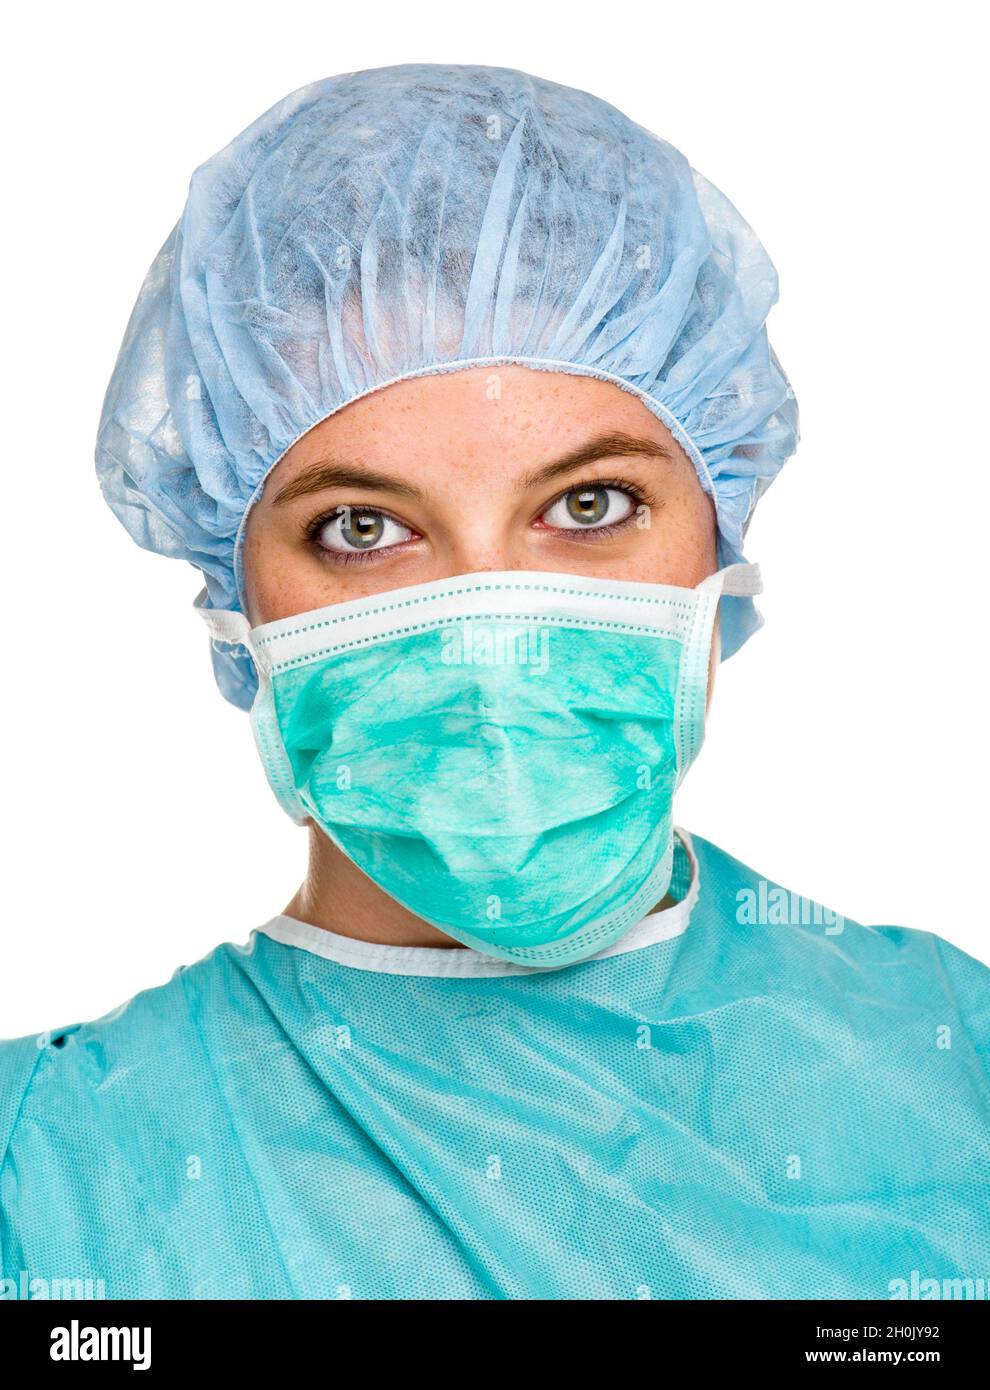 young operating room nurse with surgical mask and nurses cap Stock Photo